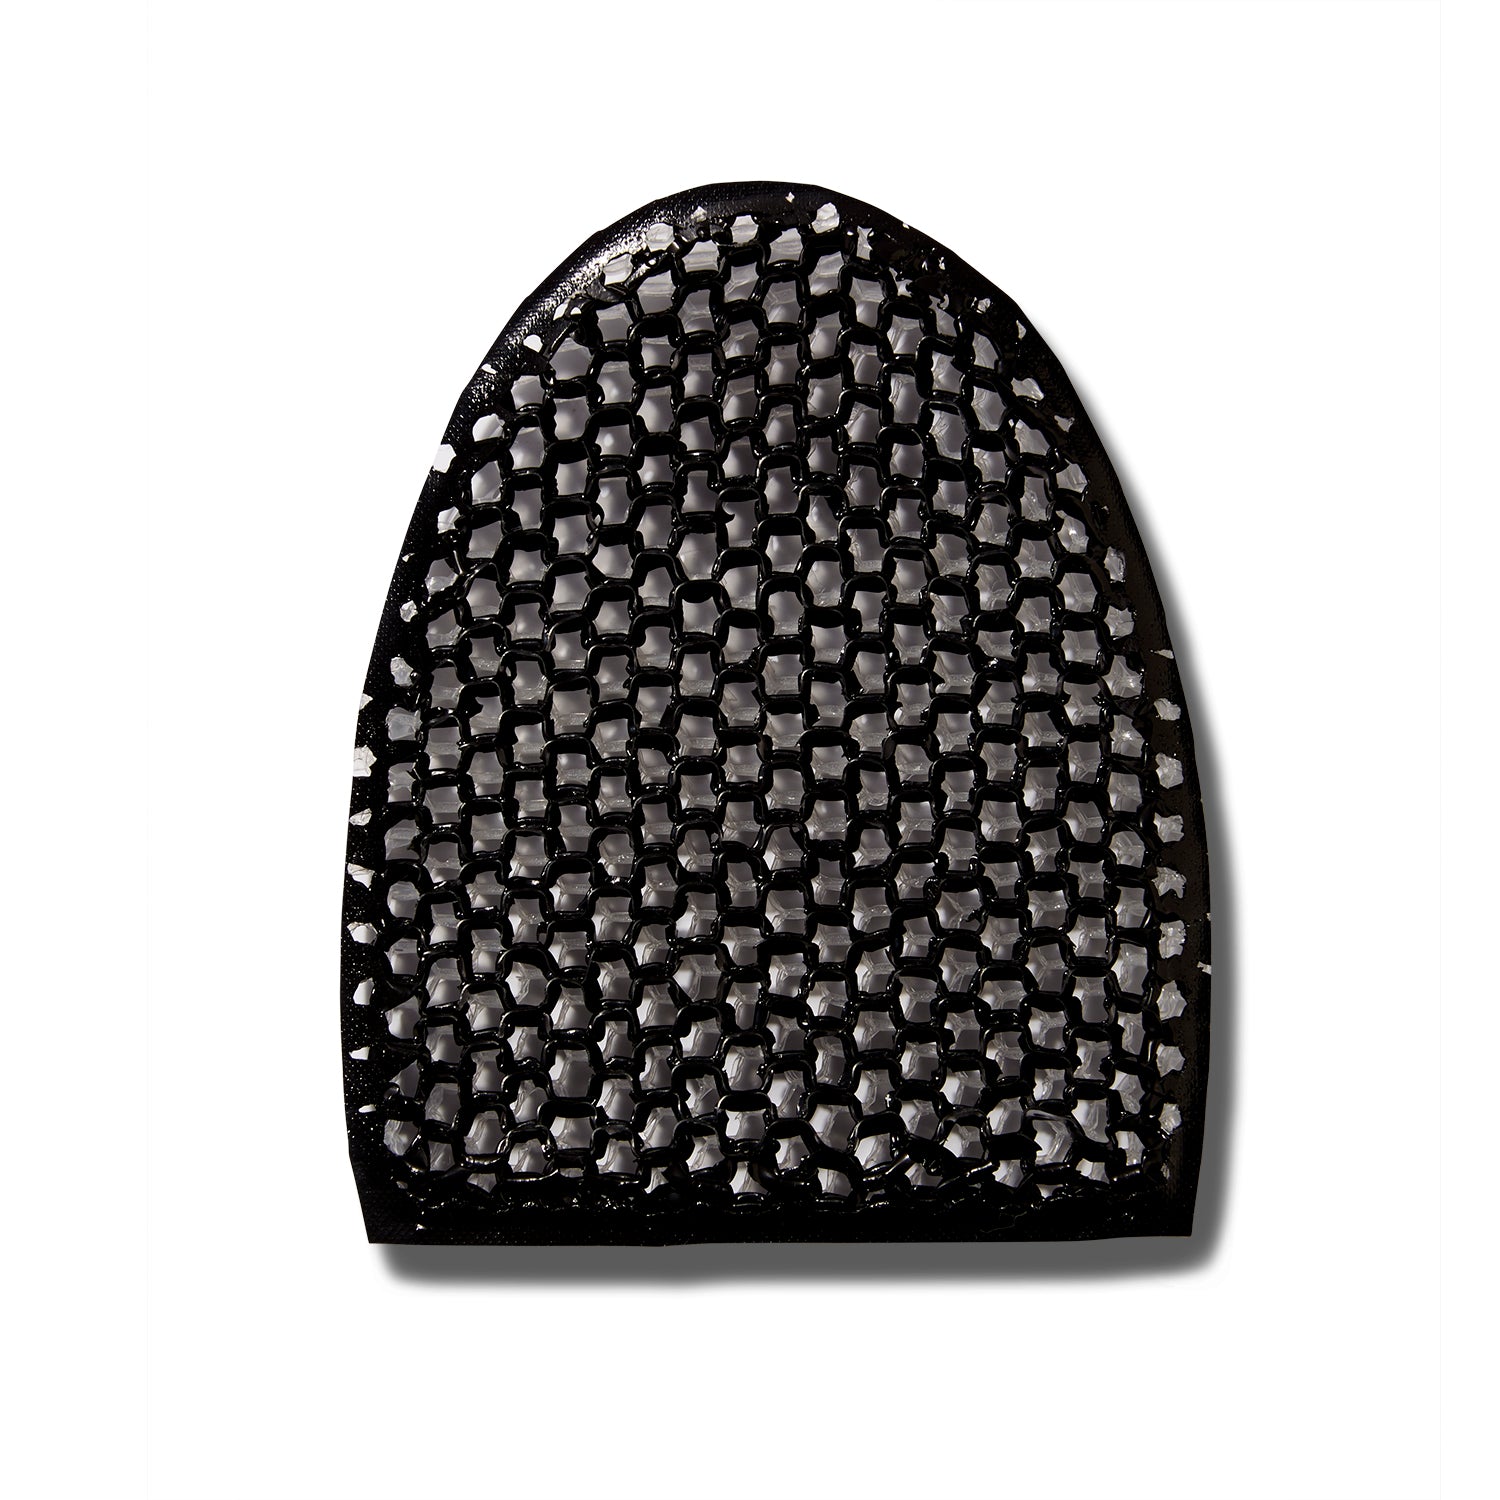 Stimulite Black & White striped honeycomb silicone Exfoliating Facial Sponge.  The honeycomb is black on this side. 